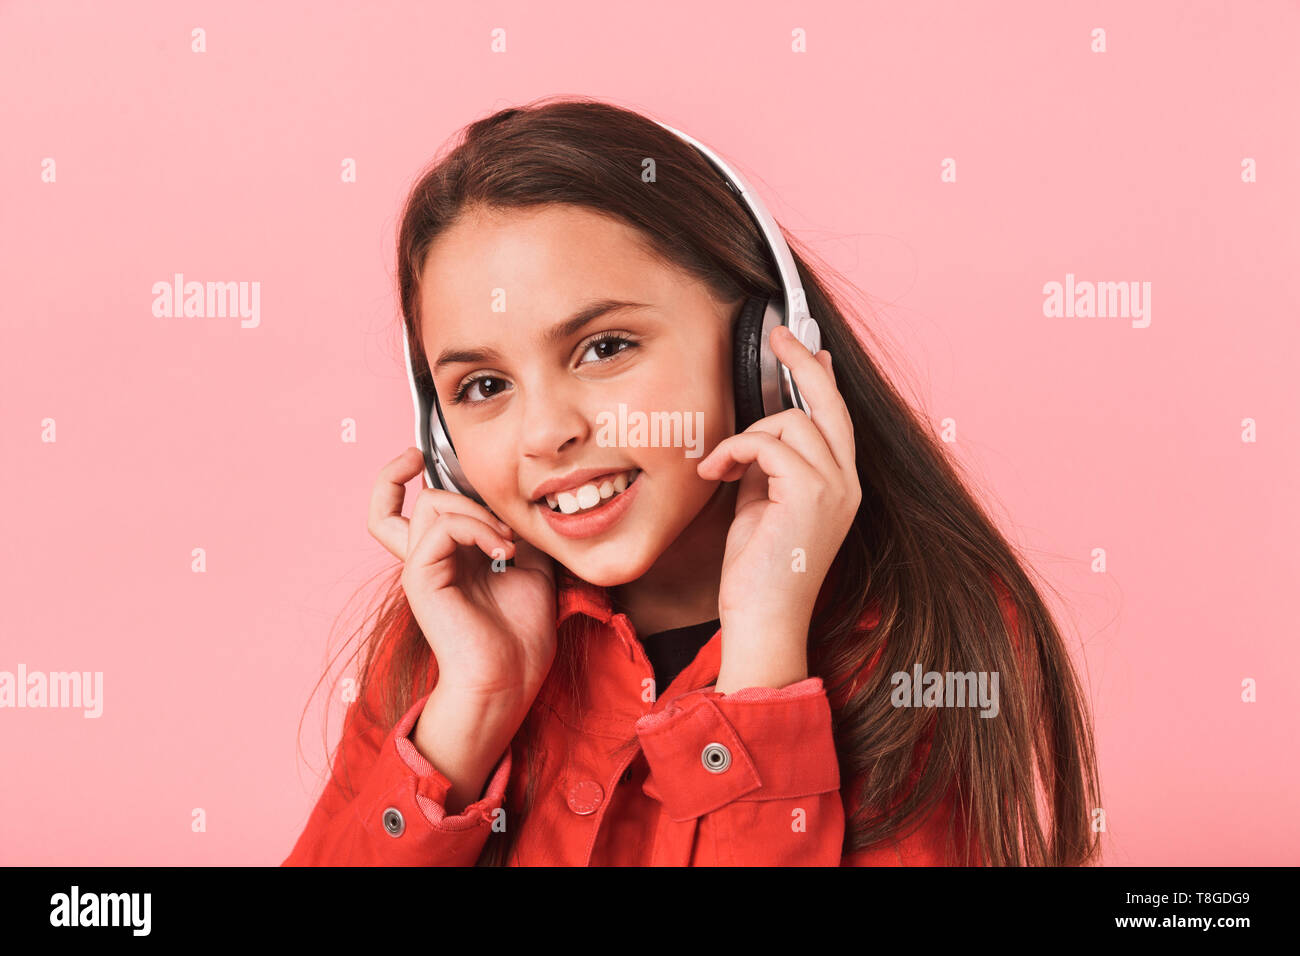 Image of caucasian little girl in casual wearing headphones listening to music isolated over red background Stock Photo